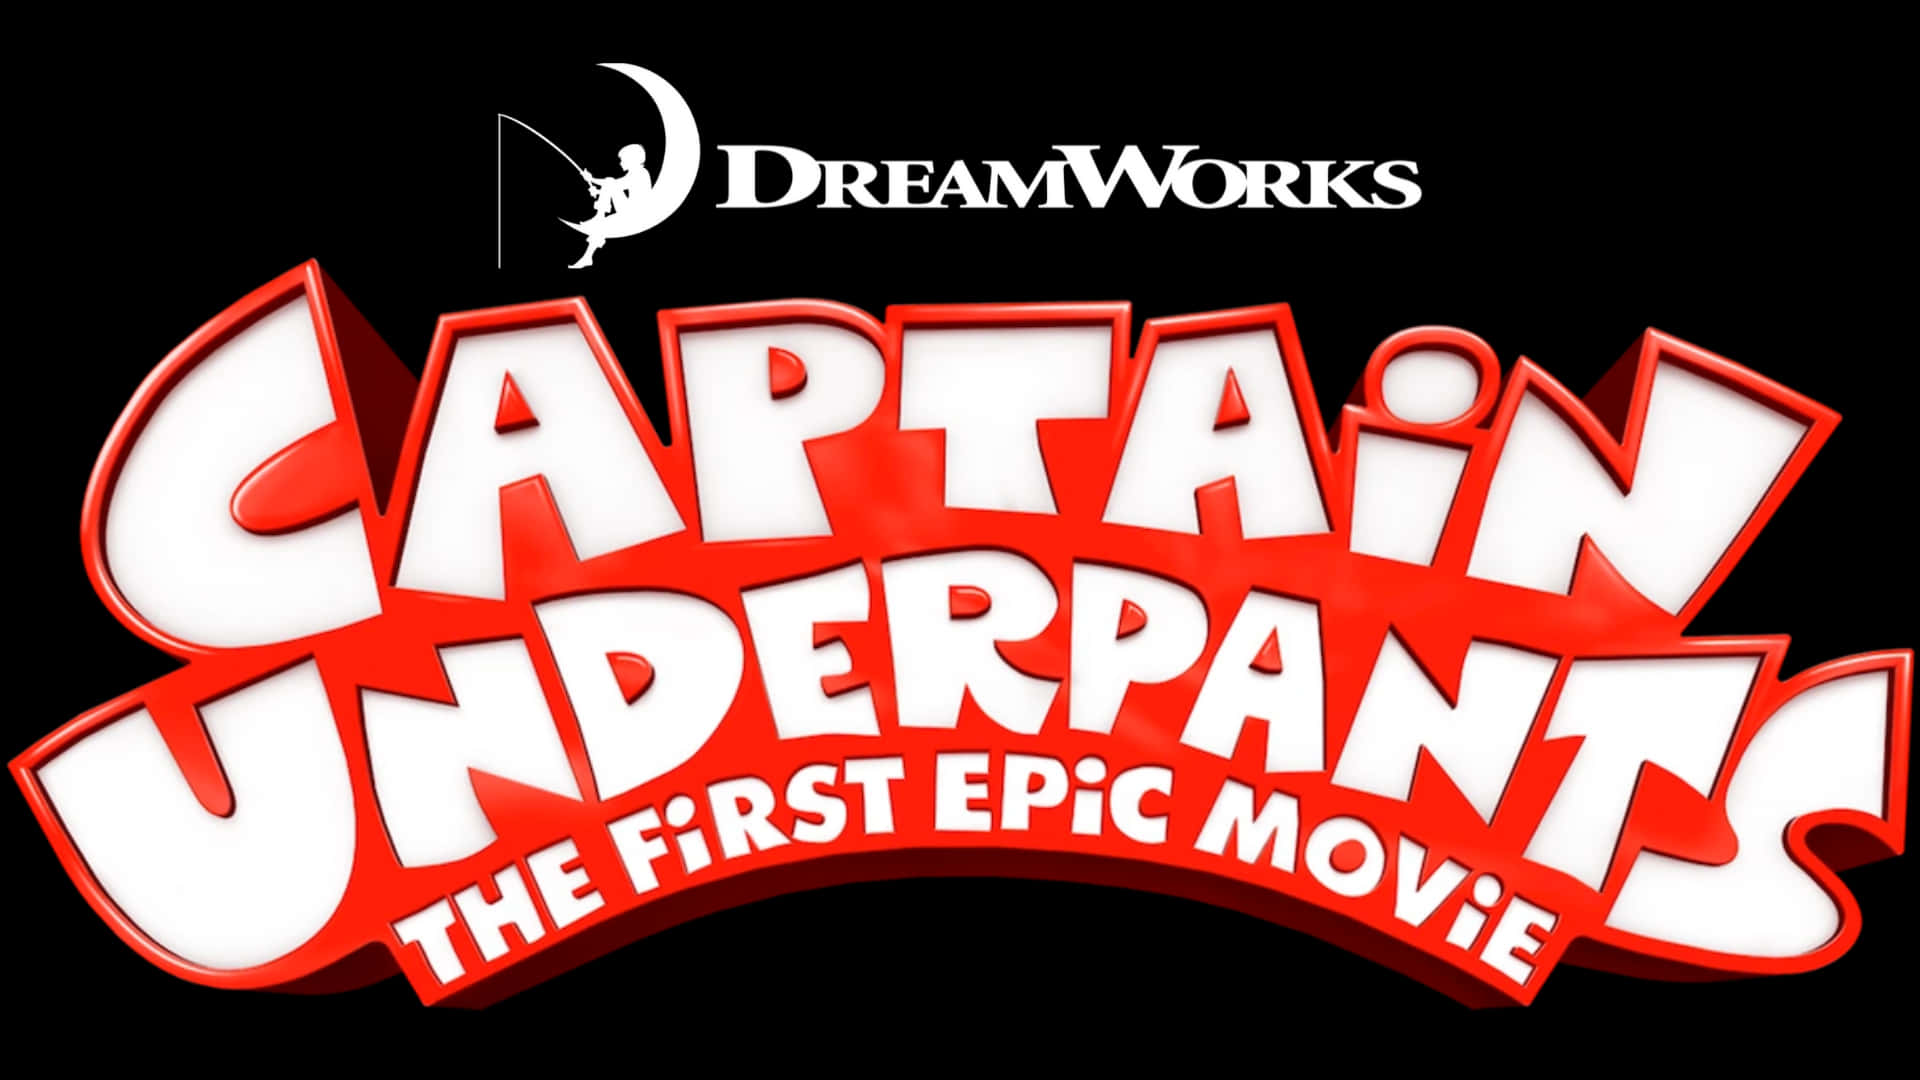 Download The iconic logo from Captain Underpants: The First Epic